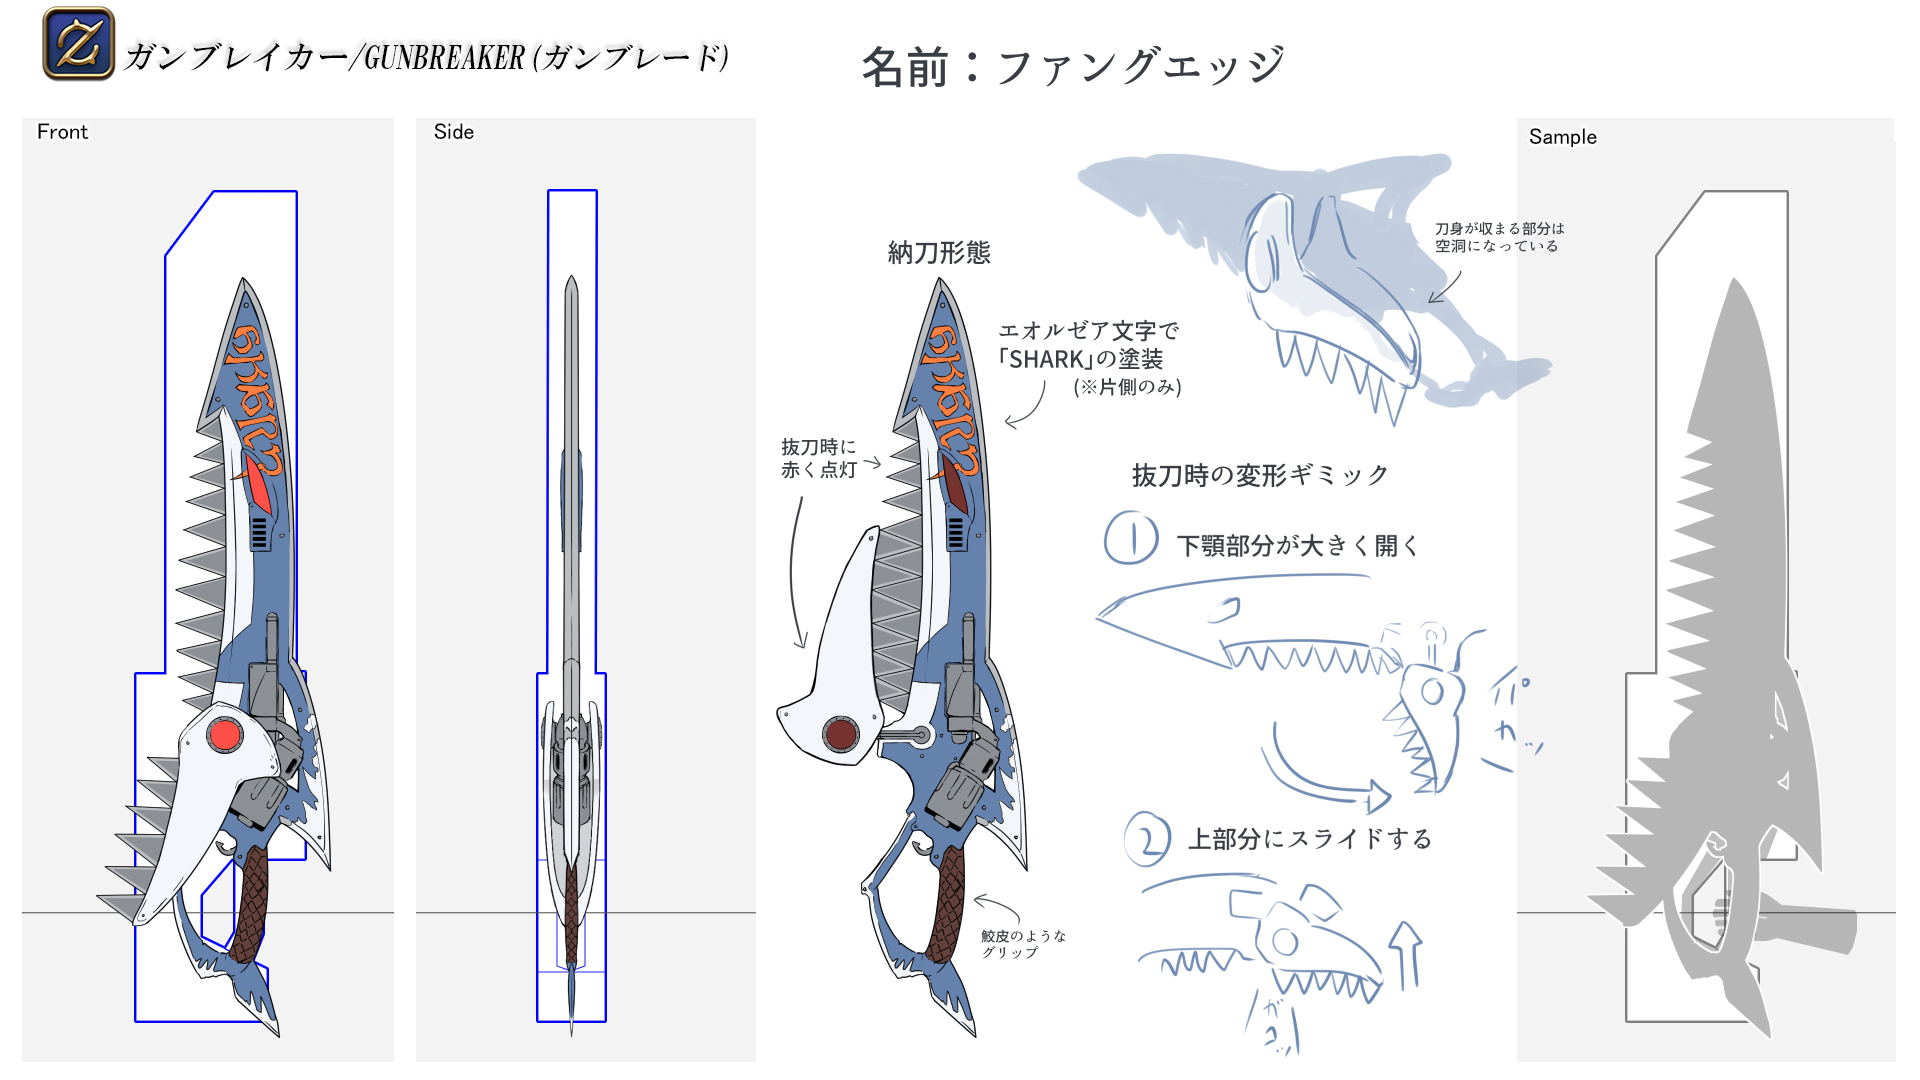 LadyMaria on X: An early look at my entry into the Deepwoken weapon design  contest. The Summer Jäger's Firelance (Transforming bayoneted rifle/Glaive)  Just gotta make a cool infographic with my lore and